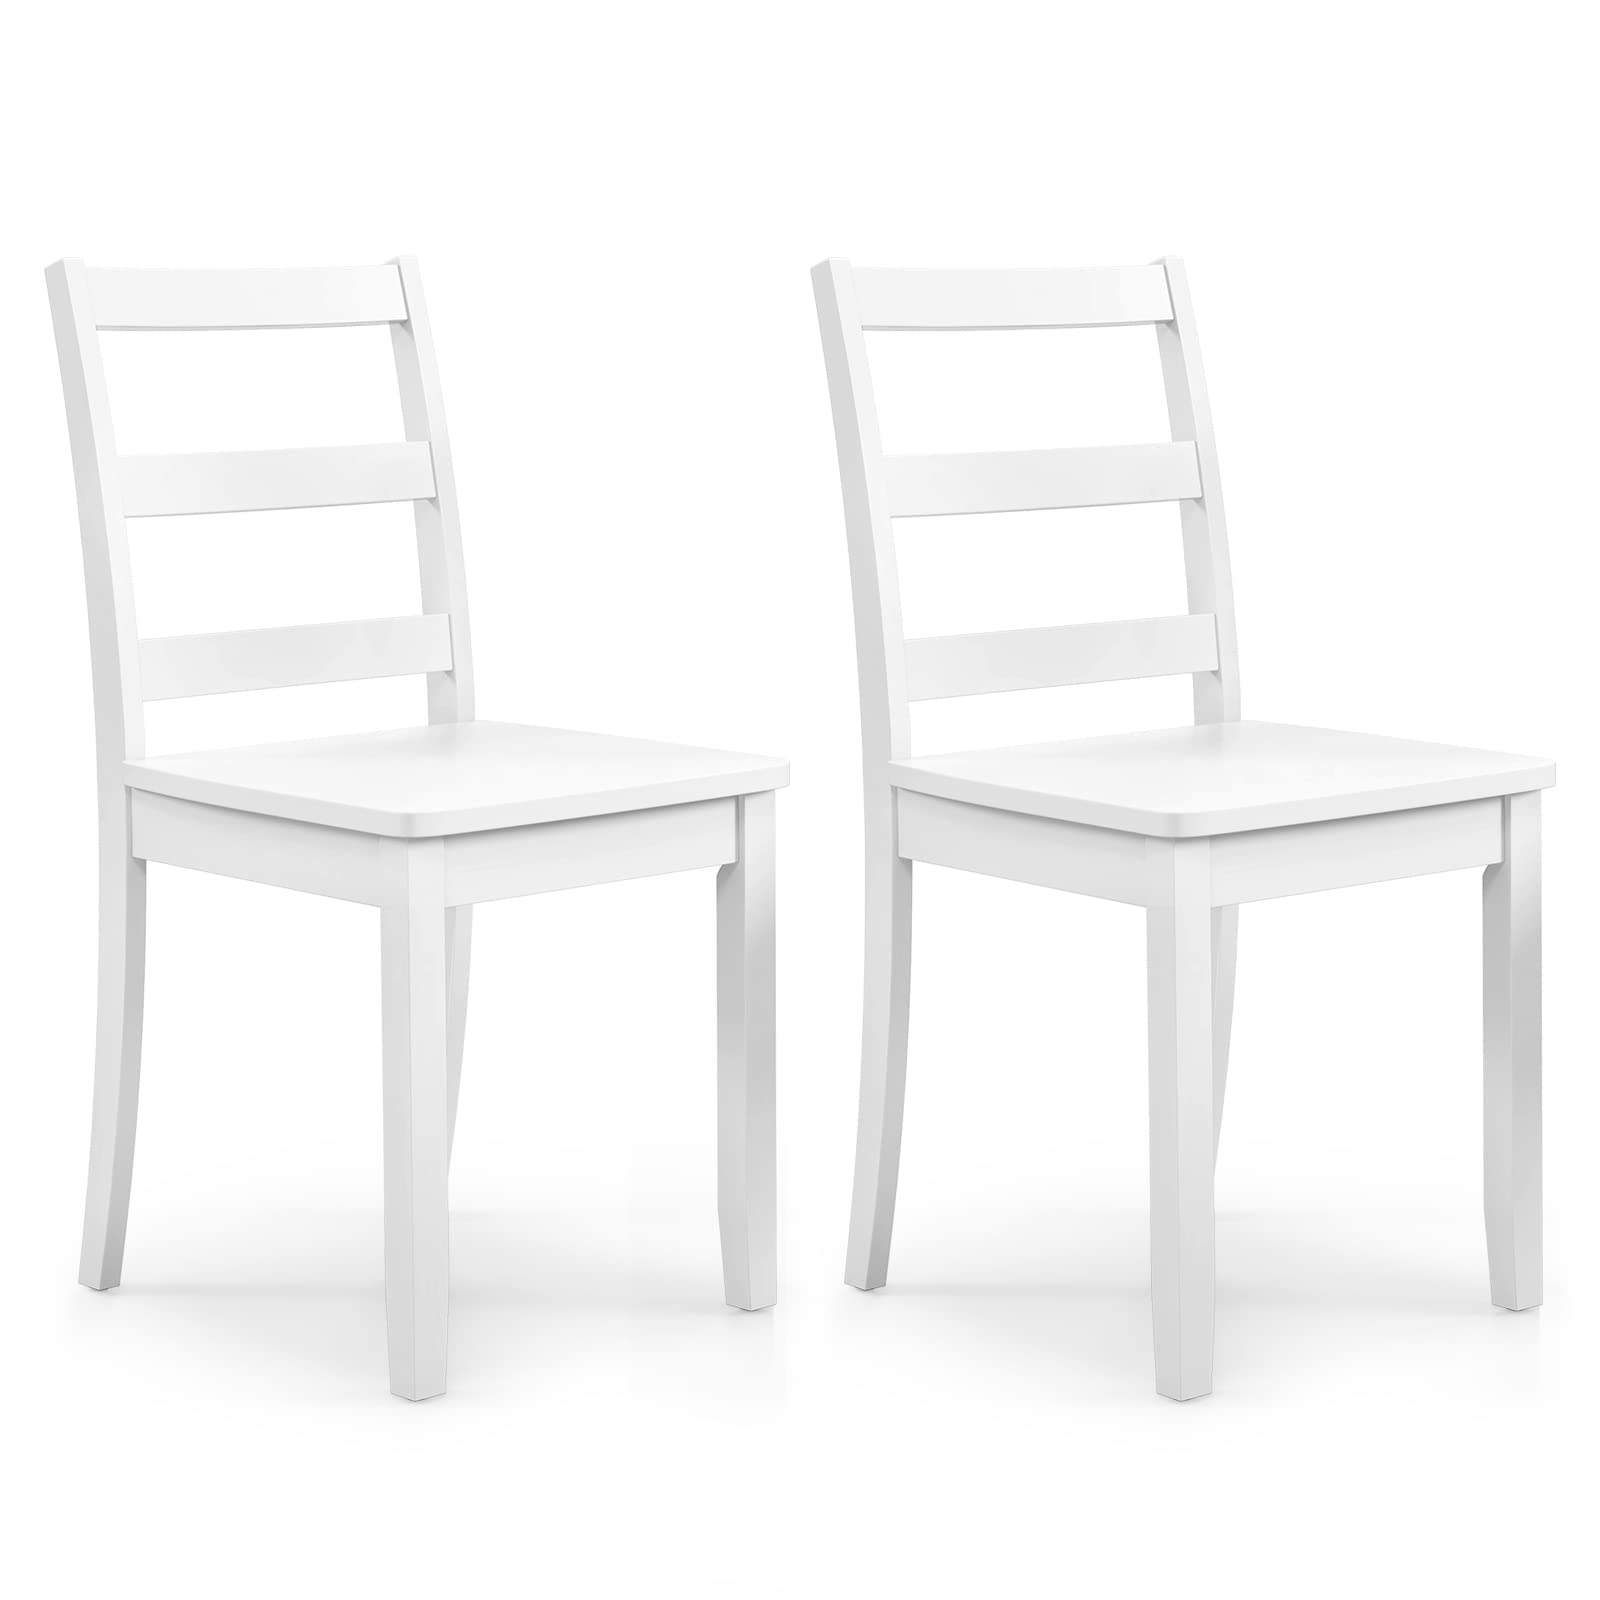 Wood Dining Chairs, White - Giantex